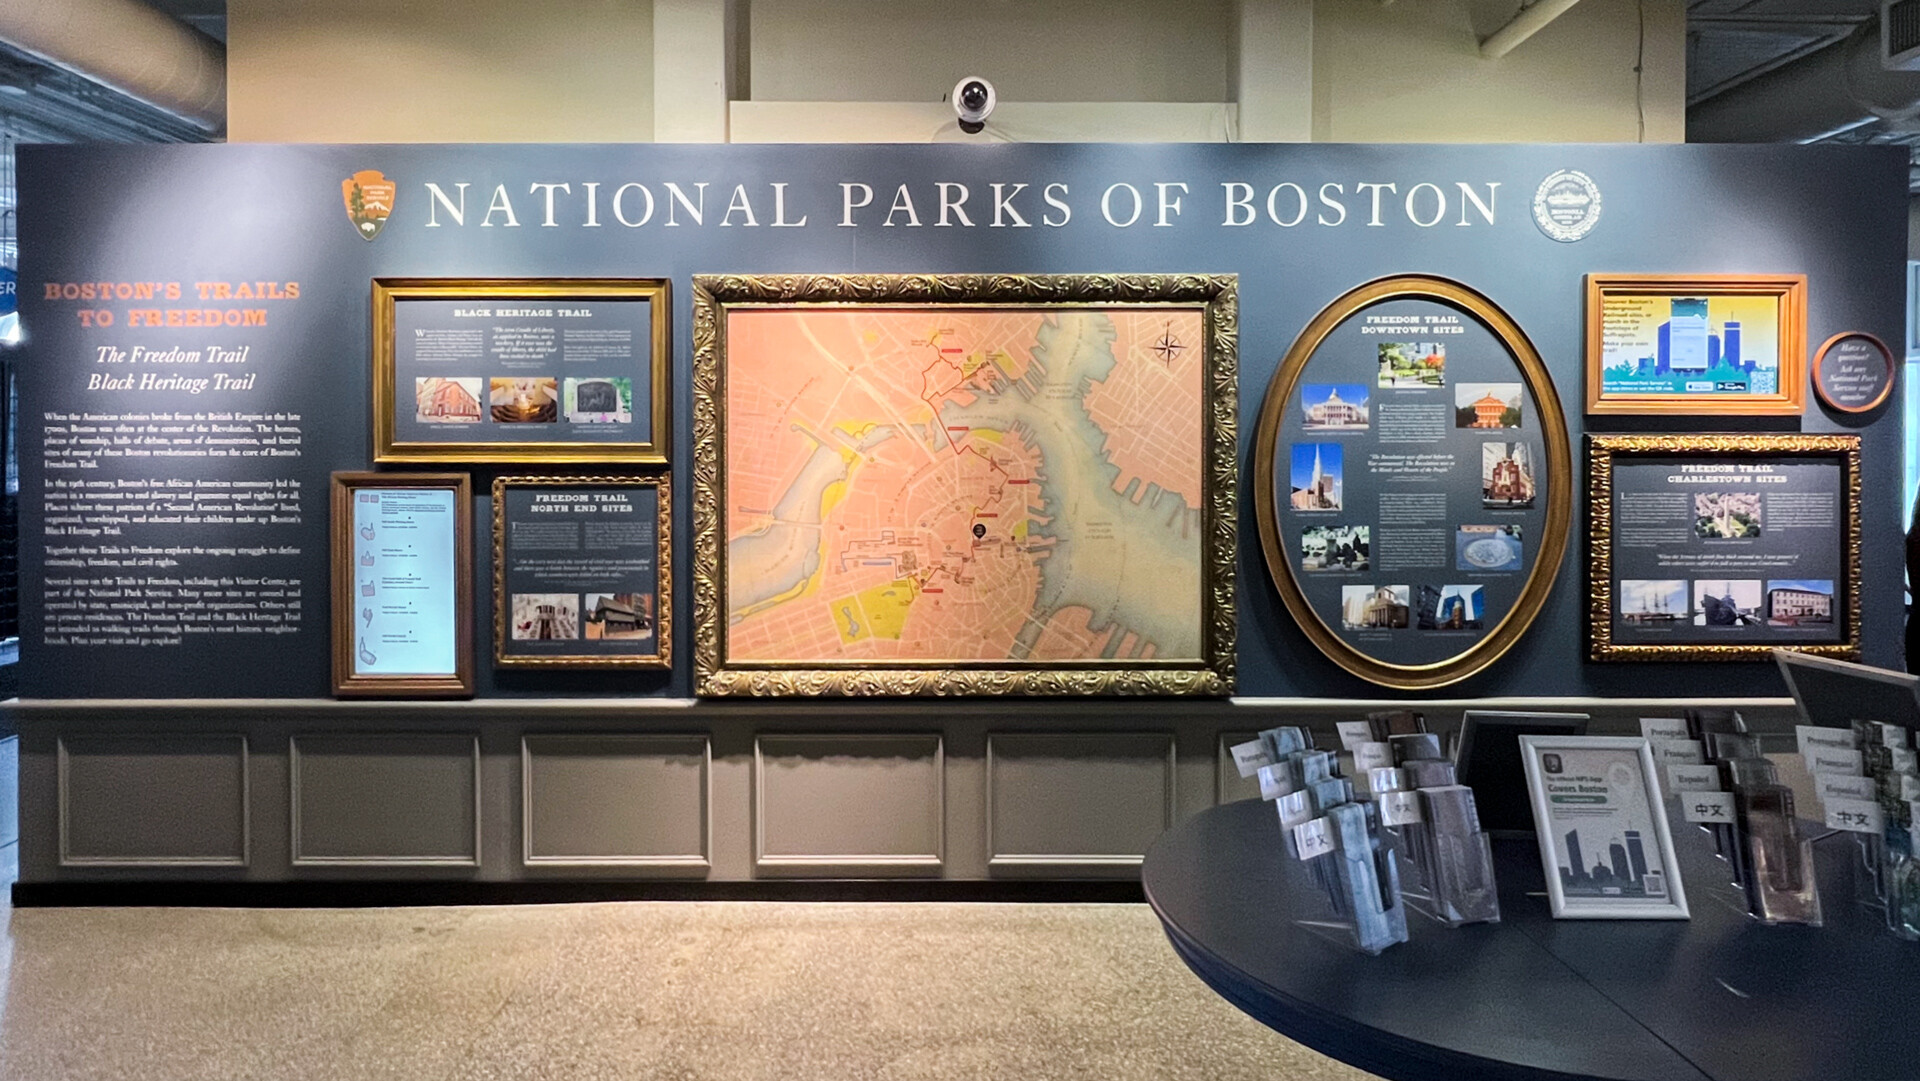 Visual Dialogue’s new National Parks of Boston information wall